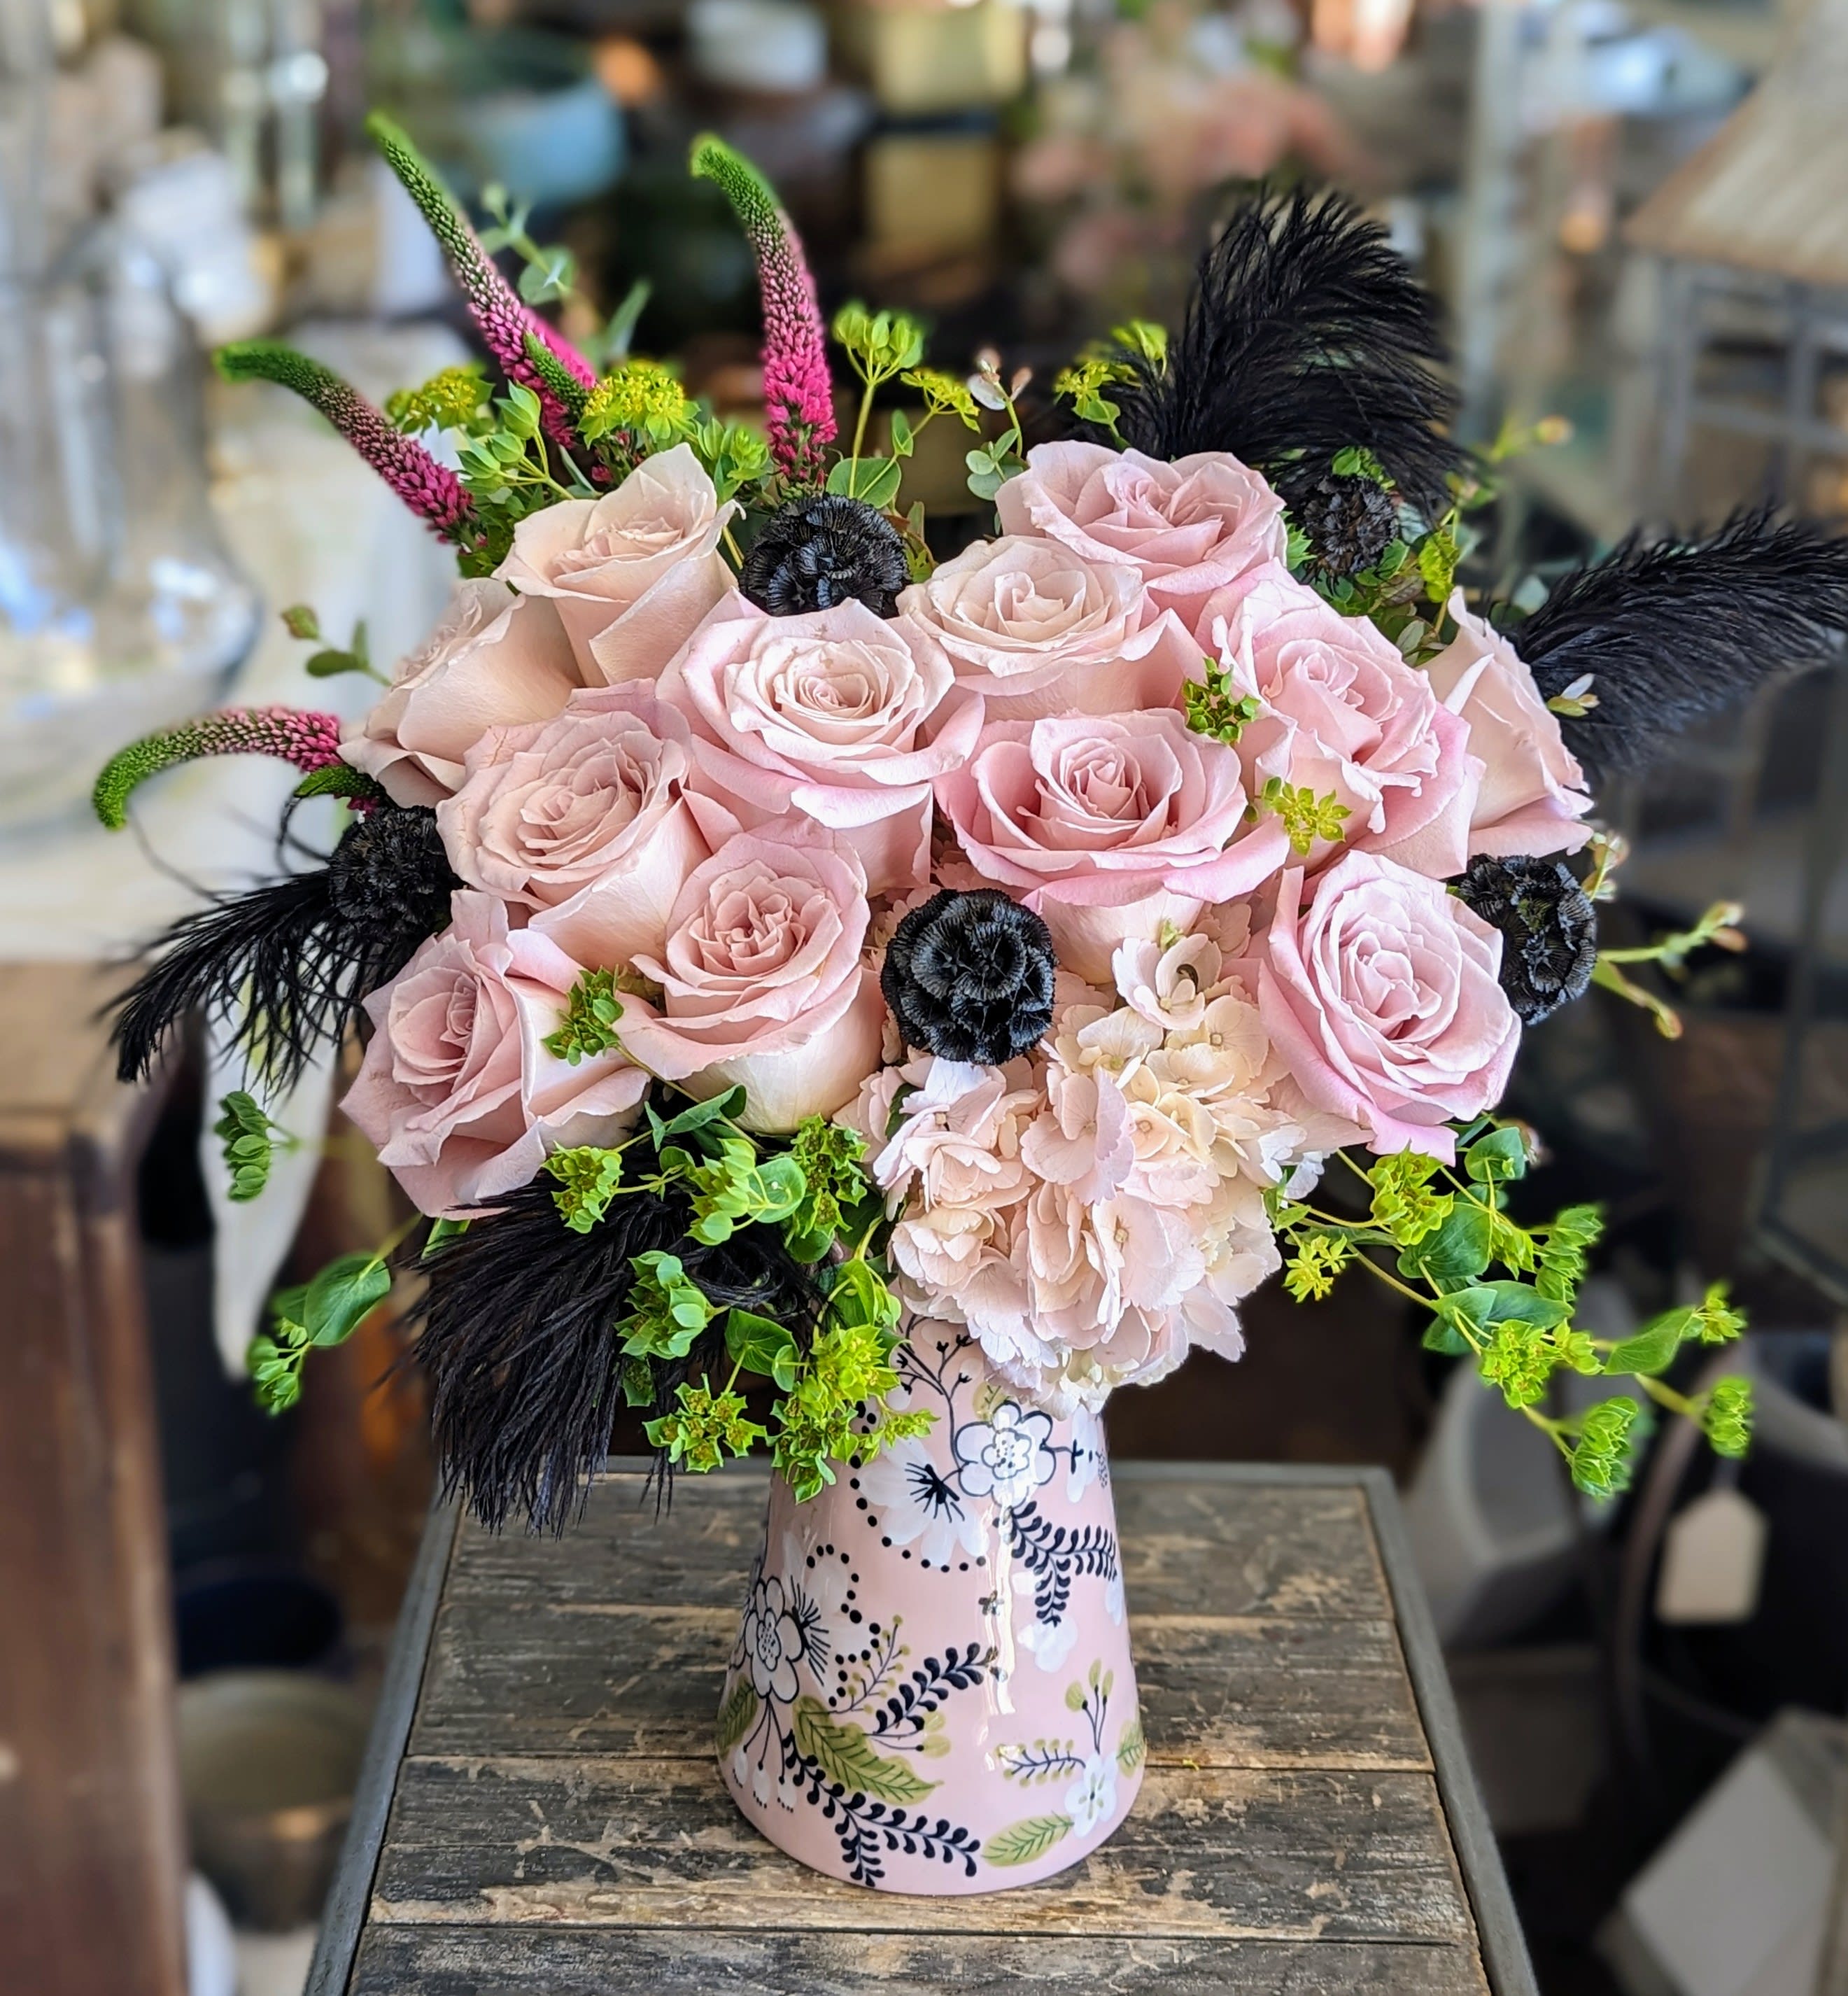 Bloomsbury - Pale pink roses, veronica, and blush hydrangea, accented with black feathers and black scabiosa pods arranged in a elegant keepsake vase.